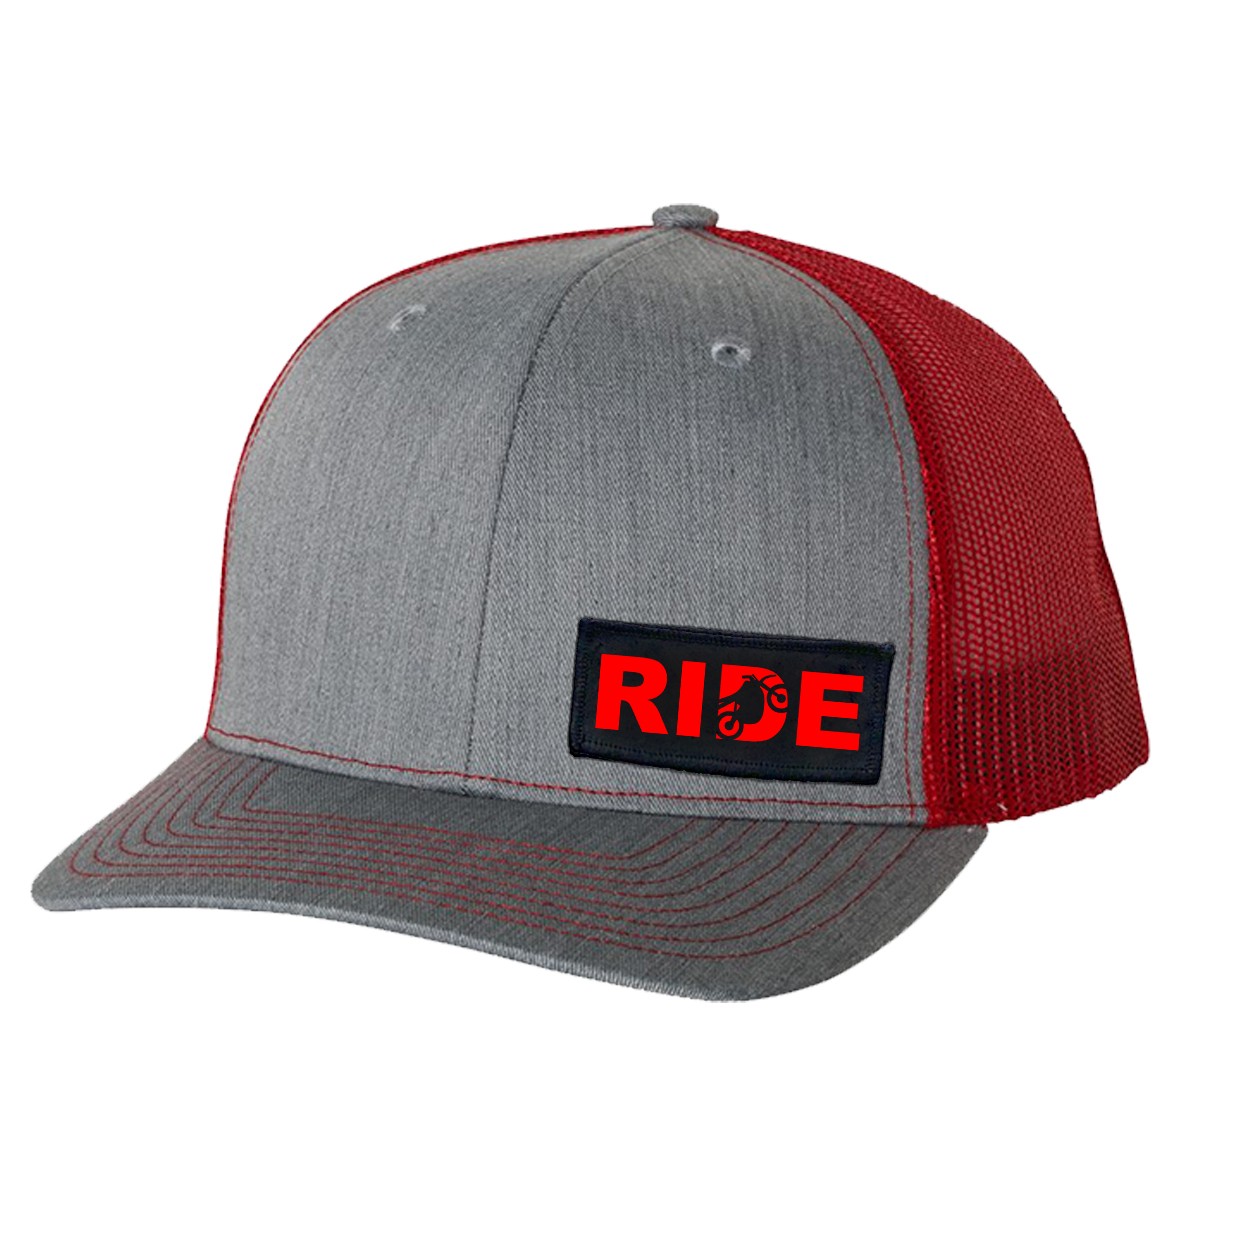 Ride Moto Logo Night Out Woven Patch Snapback Trucker Hat Heather Heather Grey/Red (Red Logo)